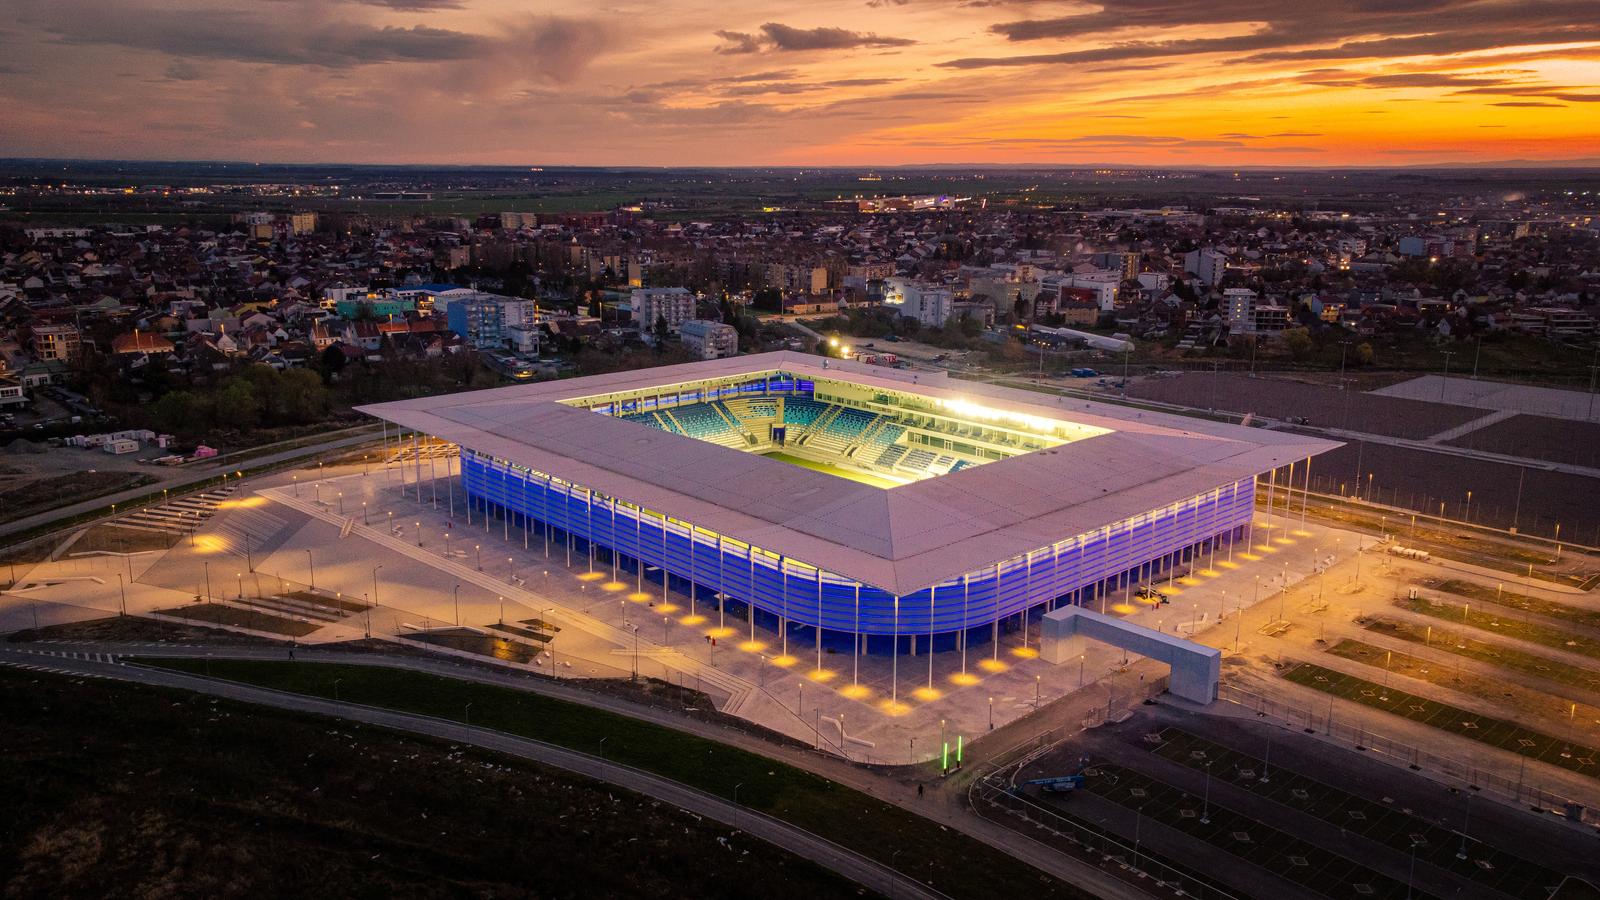 Croatia-Turkey match to be played at pictured Opus Arena